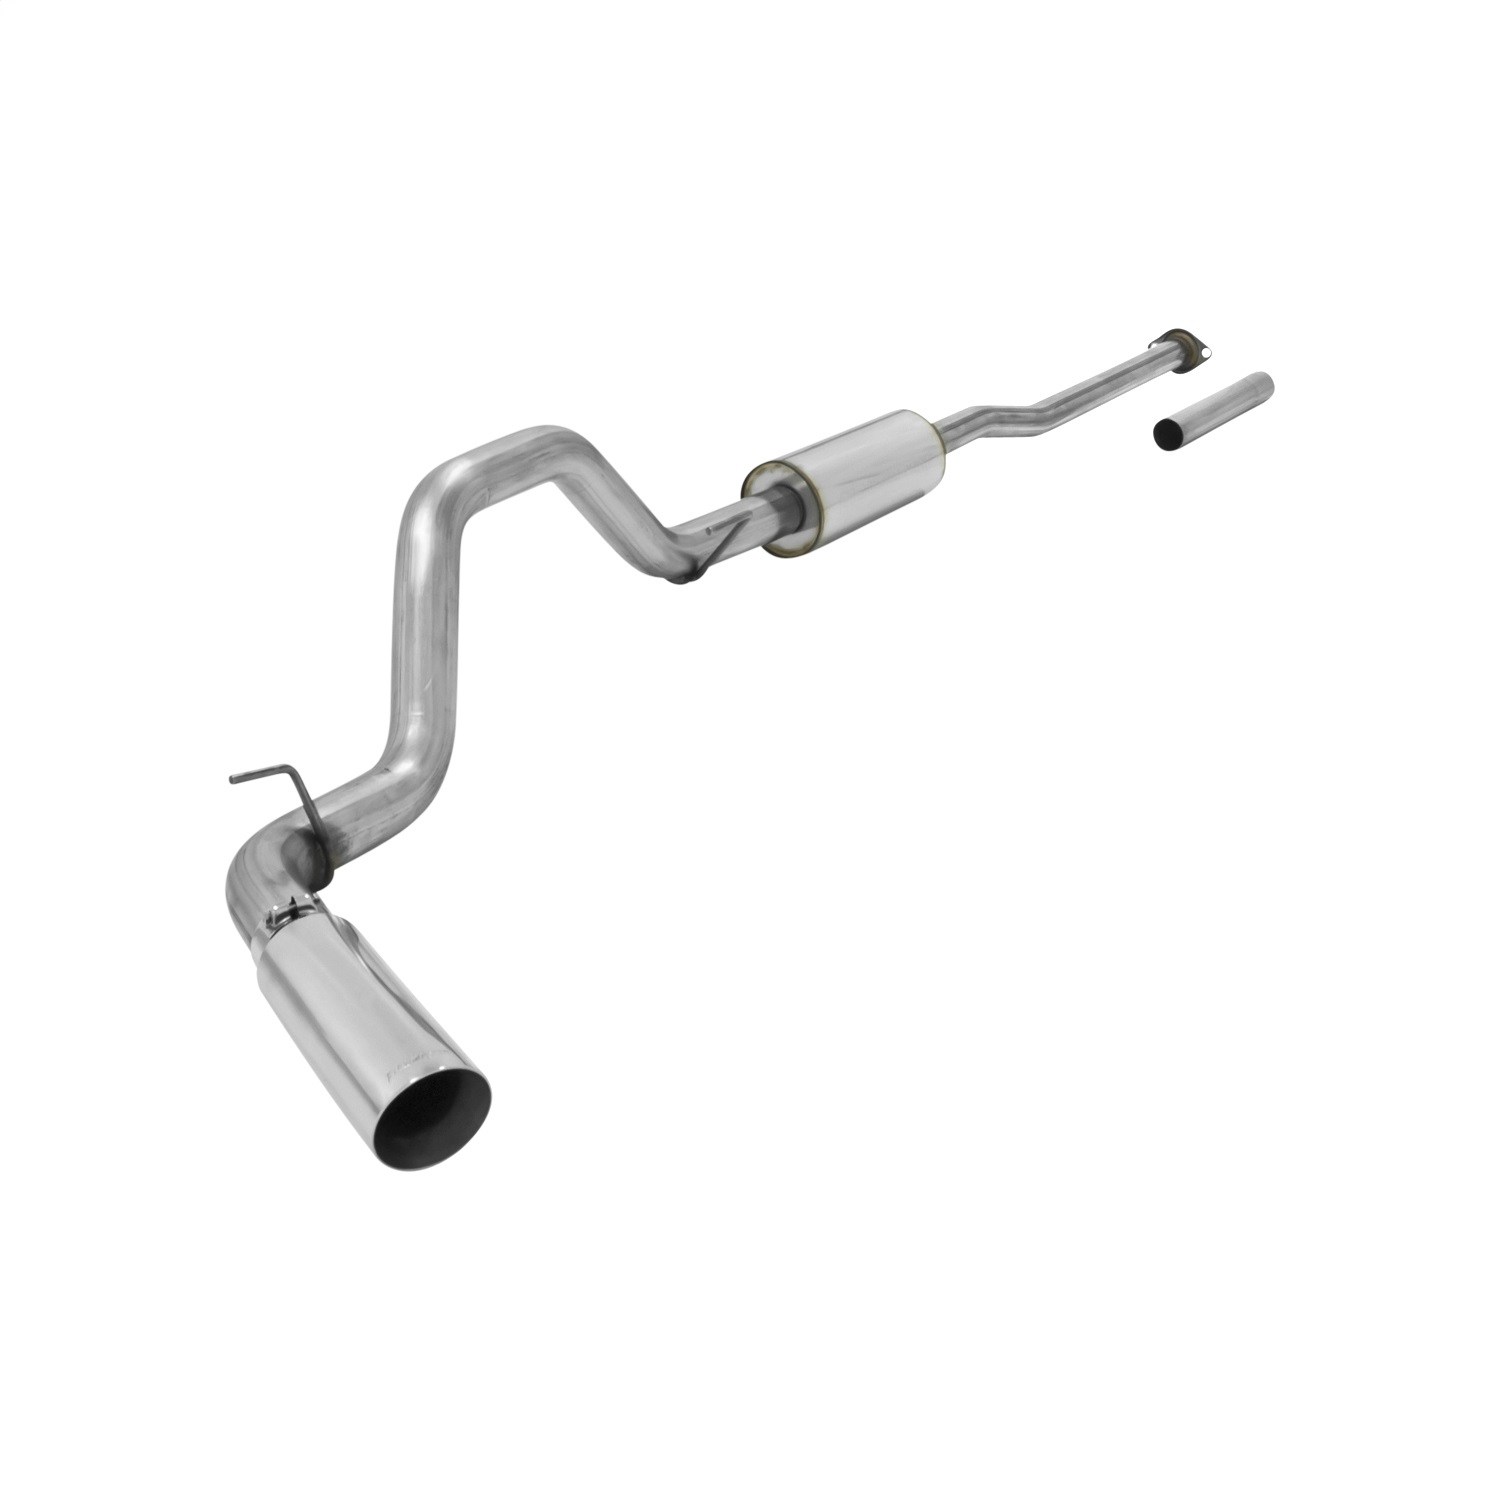 Flowmaster Flowmaster 817615 dBX Cat Back Exhaust System Fits 13-15 Tacoma Tundra